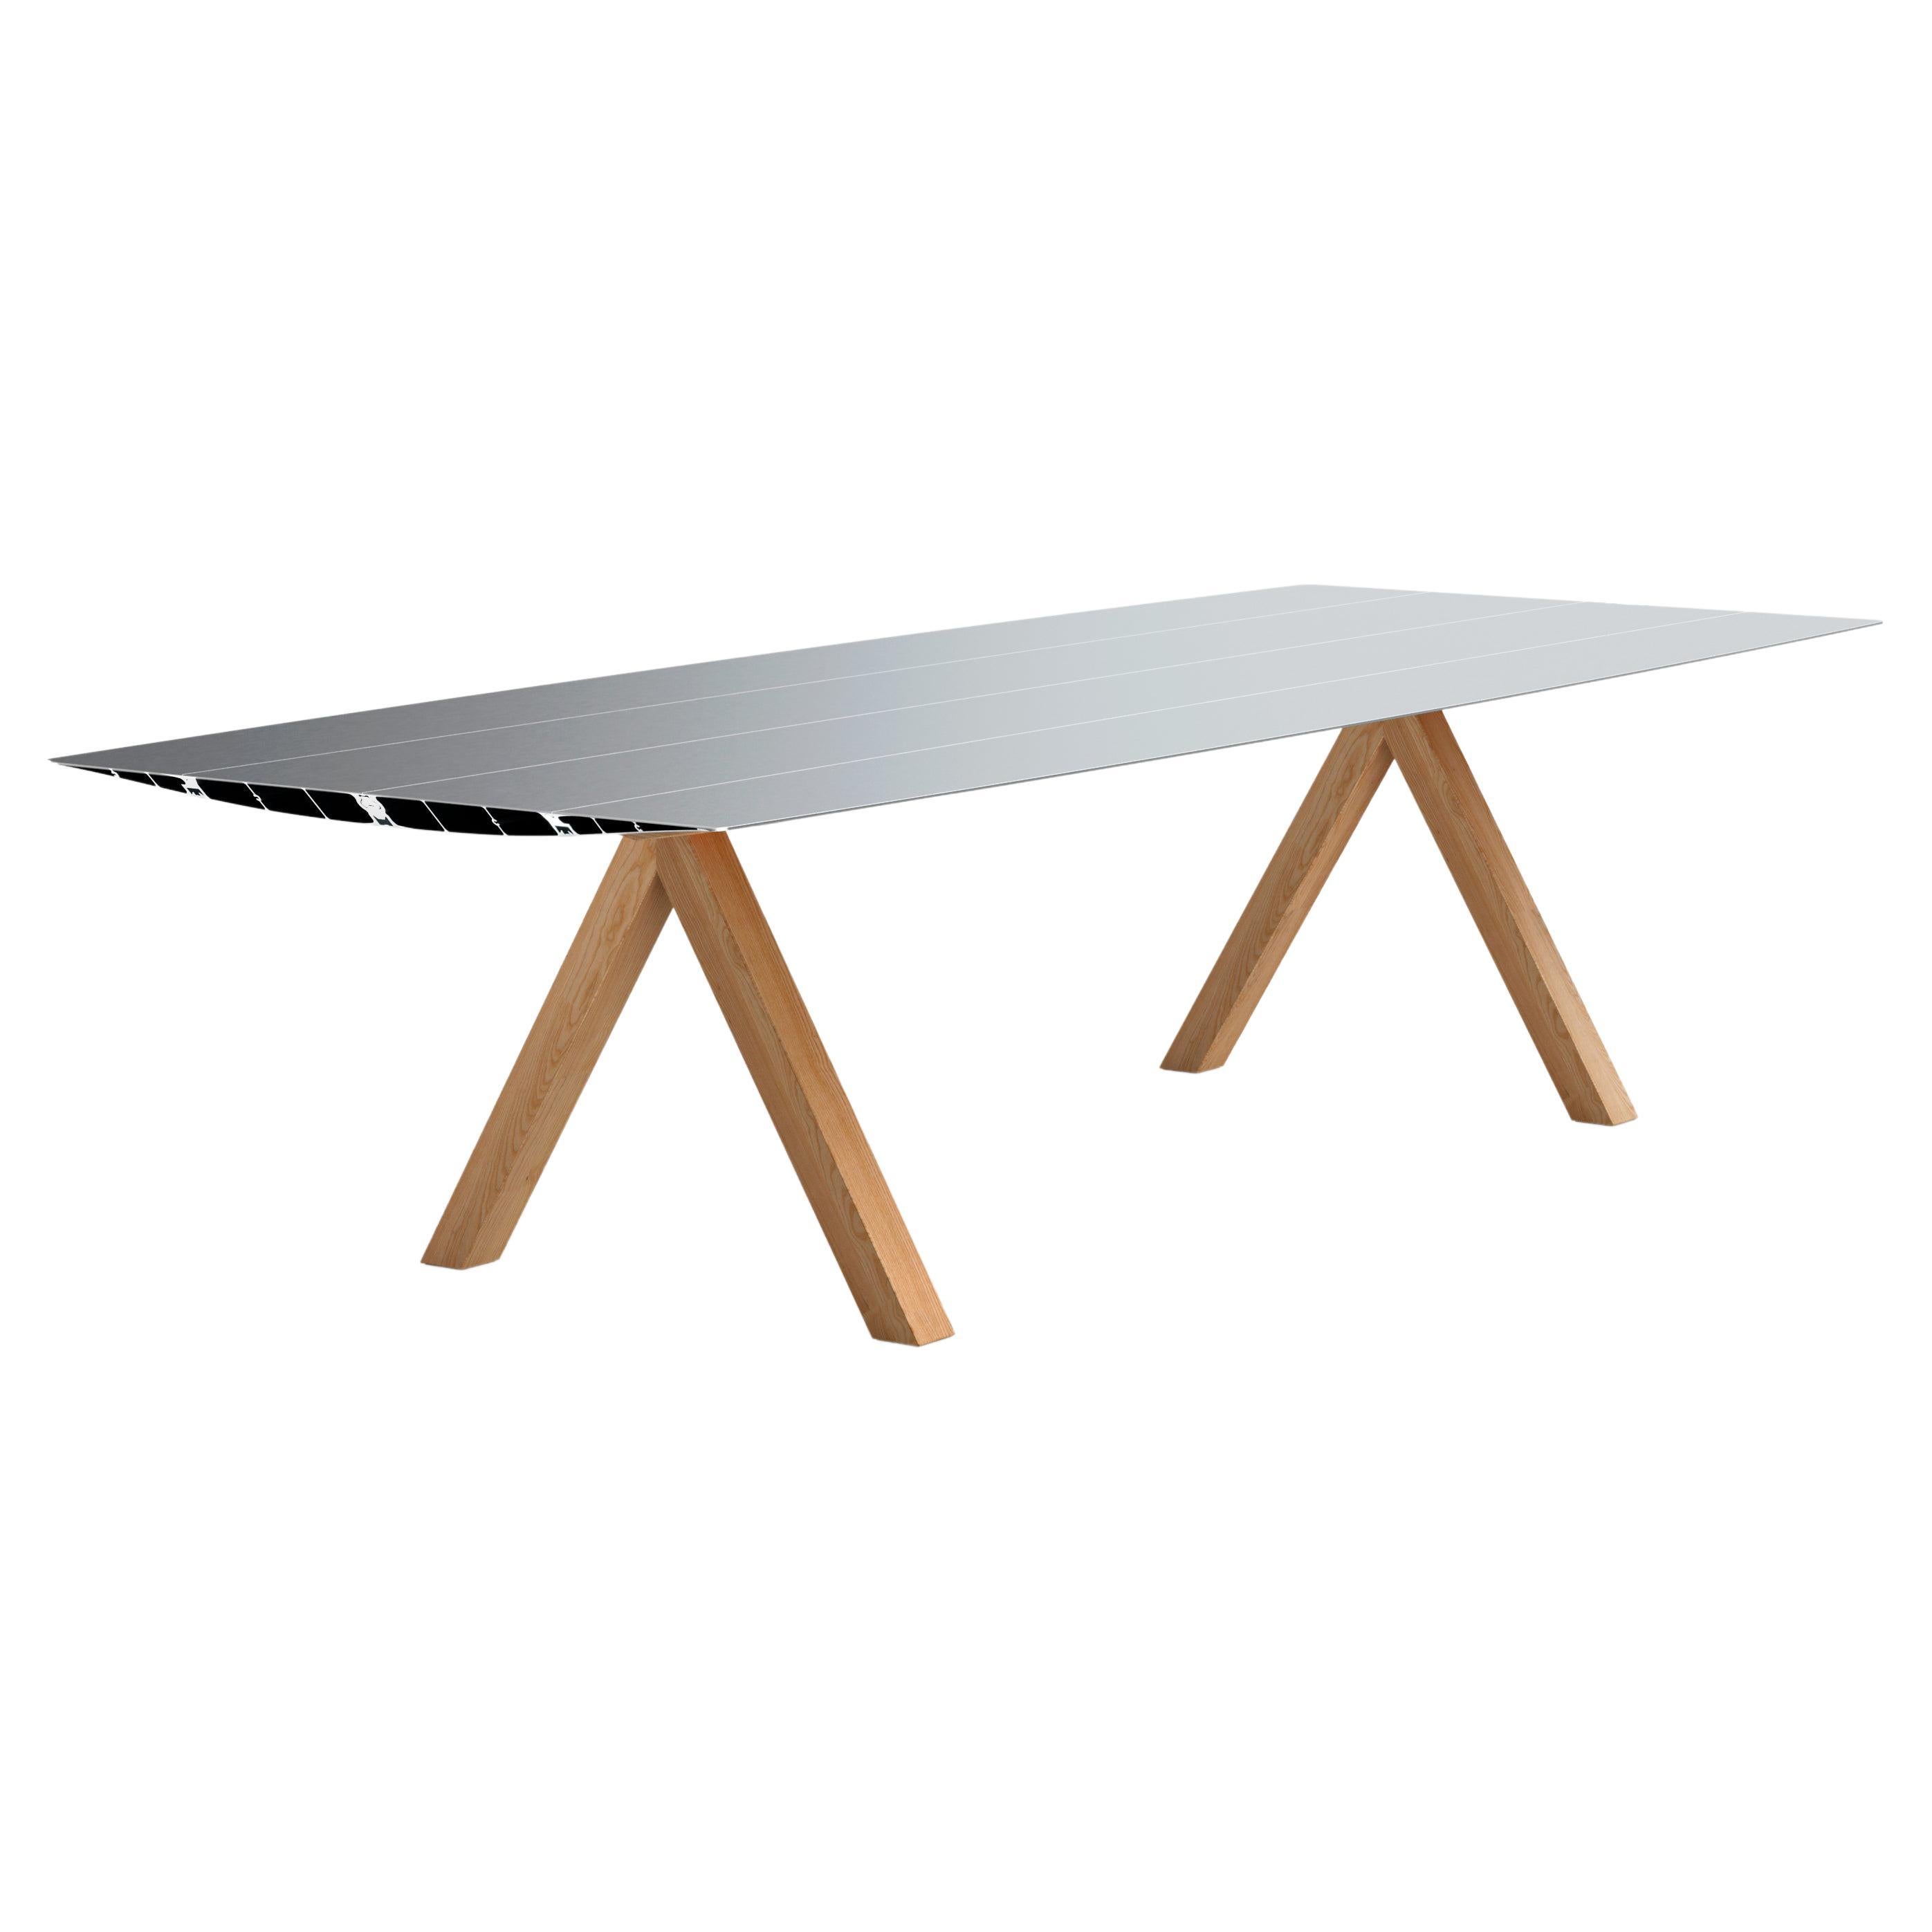 Dinning Table B 120cm Konstantin Grcic Aluminum Anodized Silver Top Wooden legs 